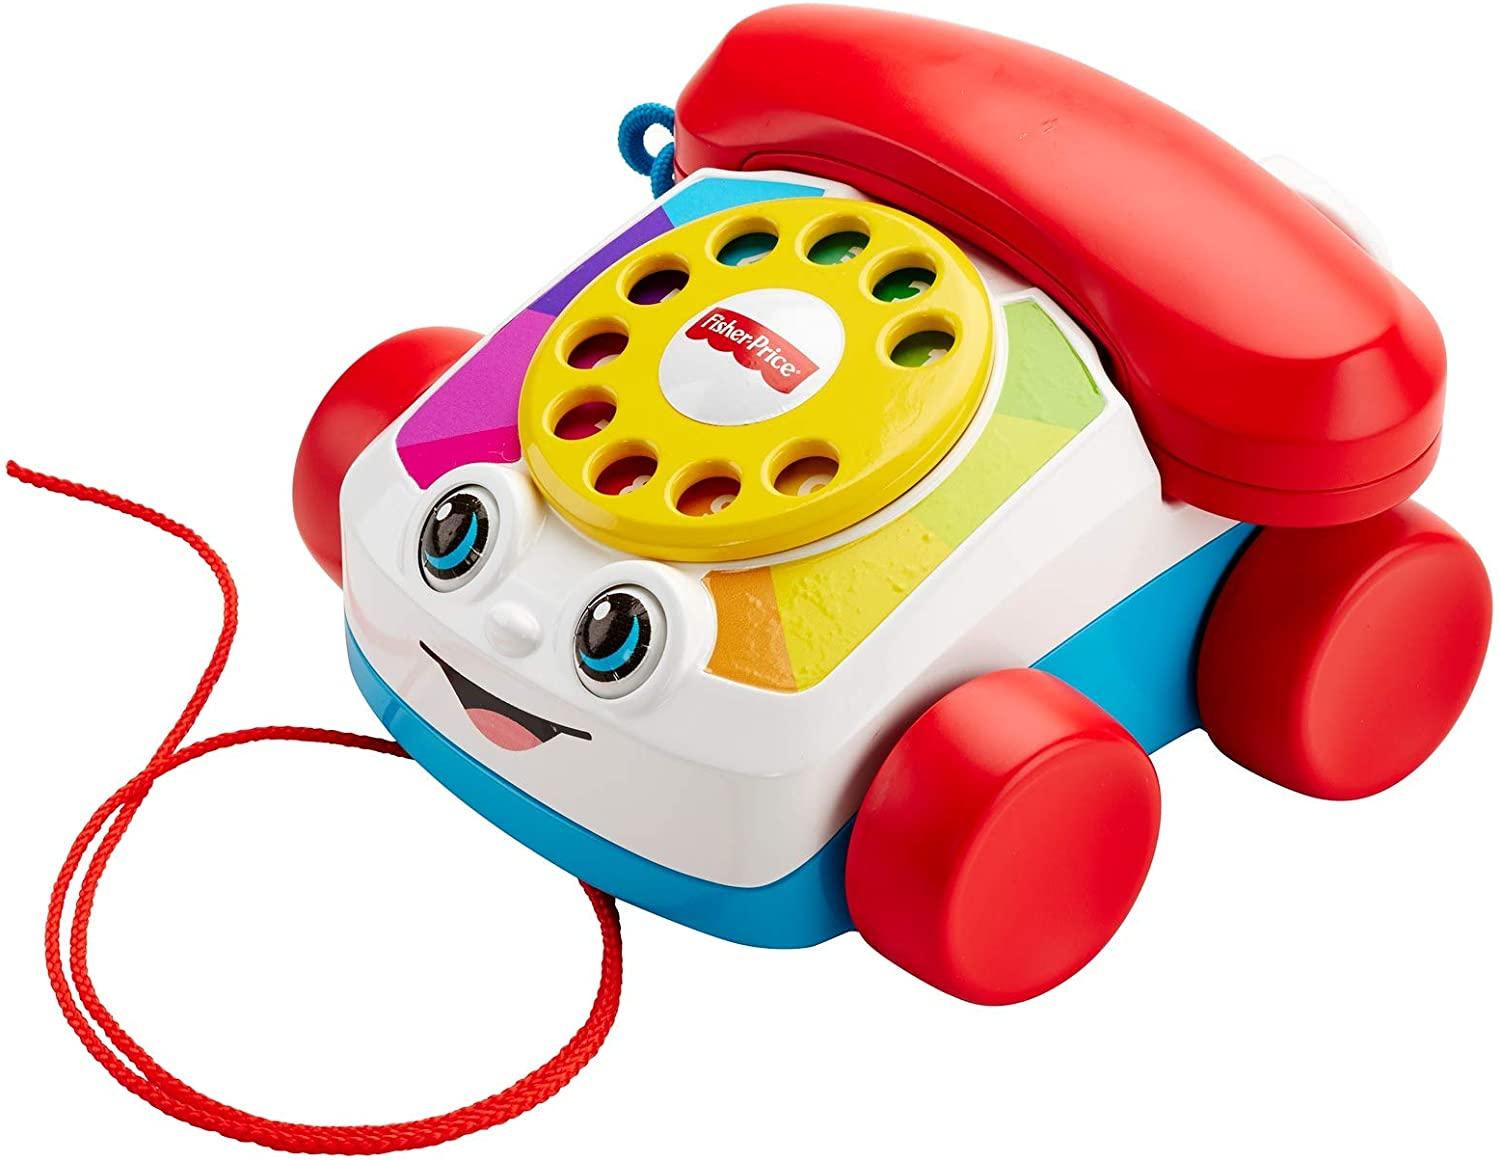 Fisher-Price Chatter Telephone for $5